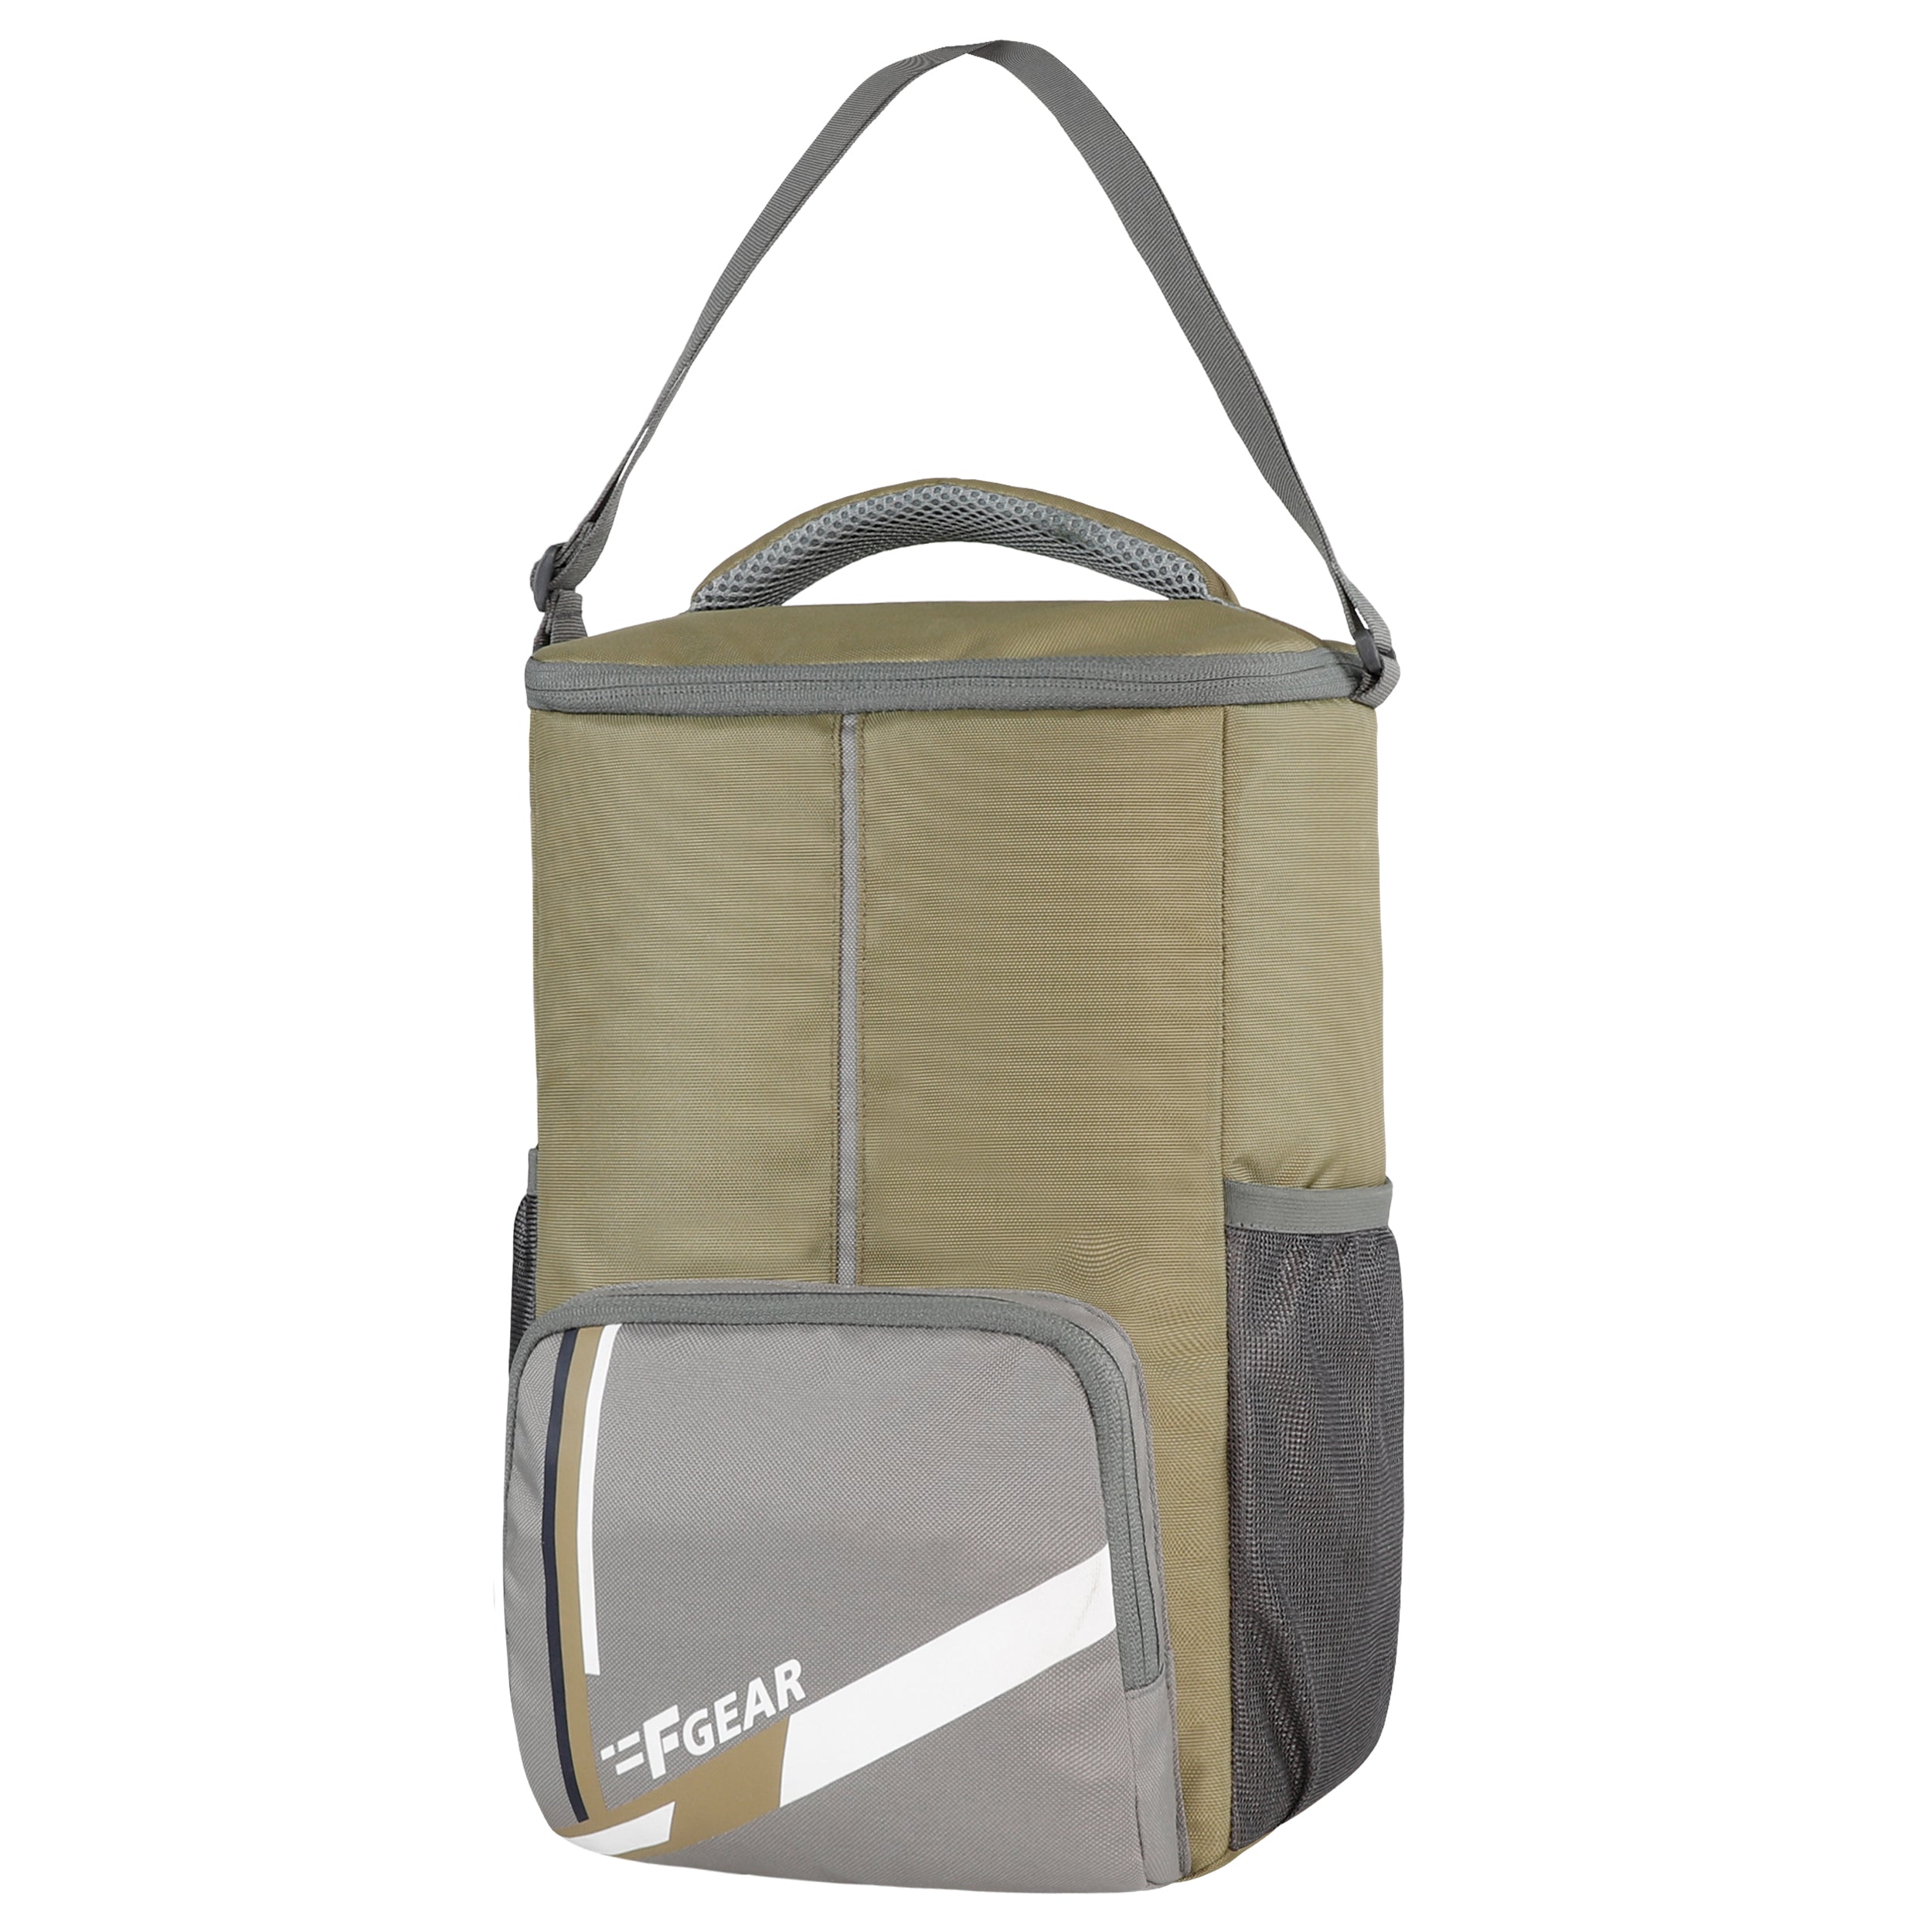 Diagonal Bag Men's (Color : Khaki, Size : M) : Amazon.in: Bags, Wallets and  Luggage